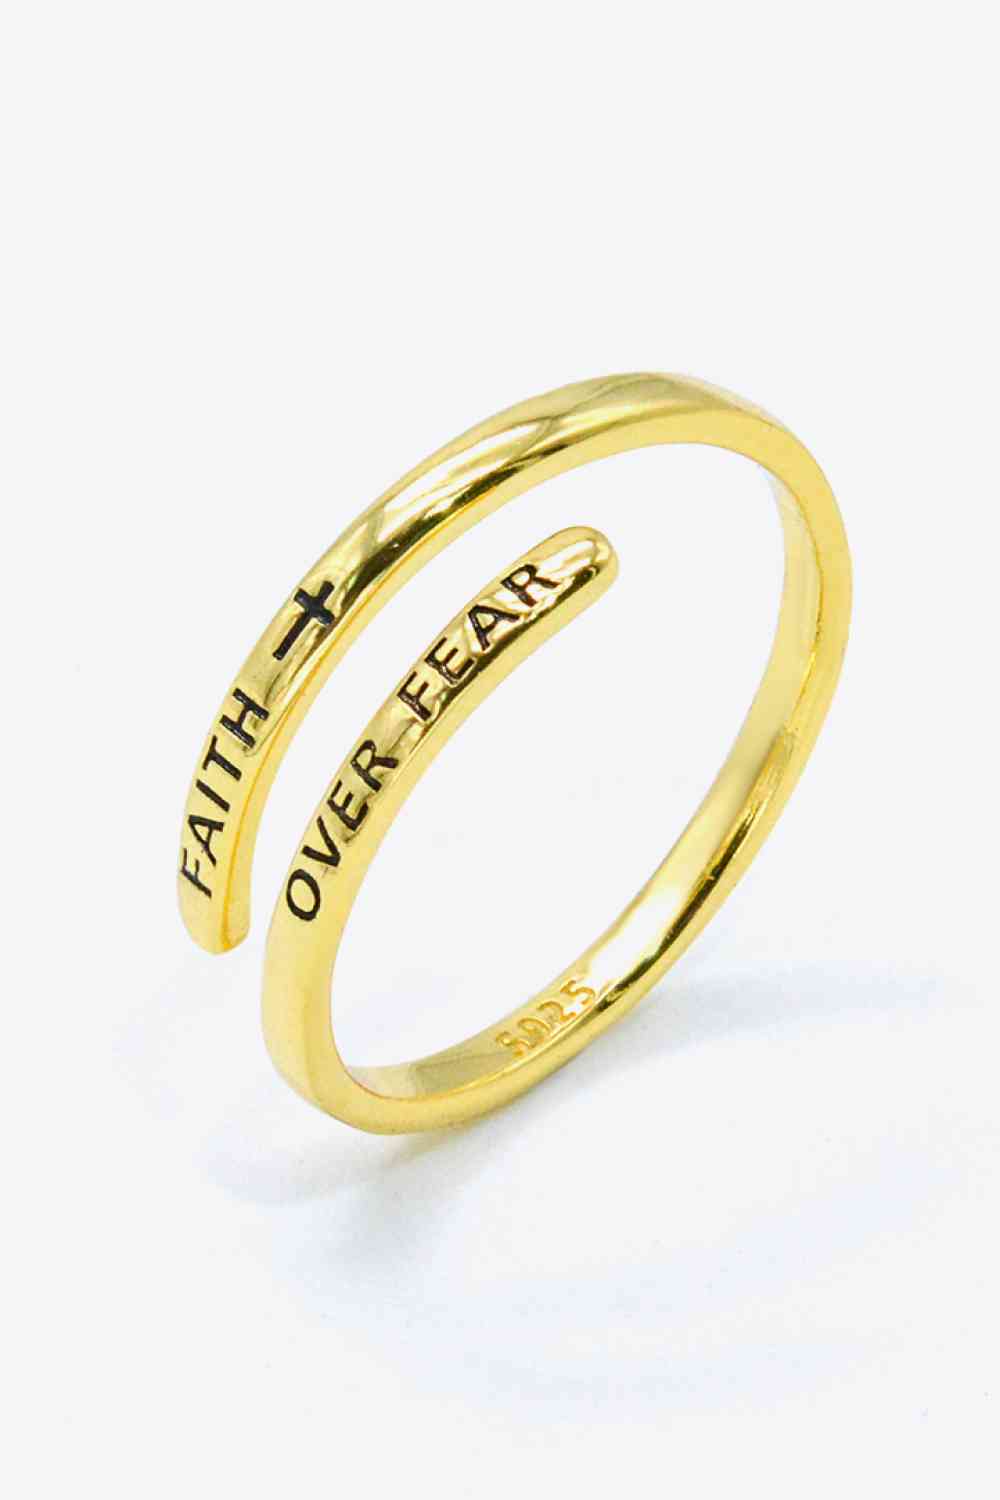 FAITH OVER FEAR Bypass Ring - Cheeky Chic Boutique